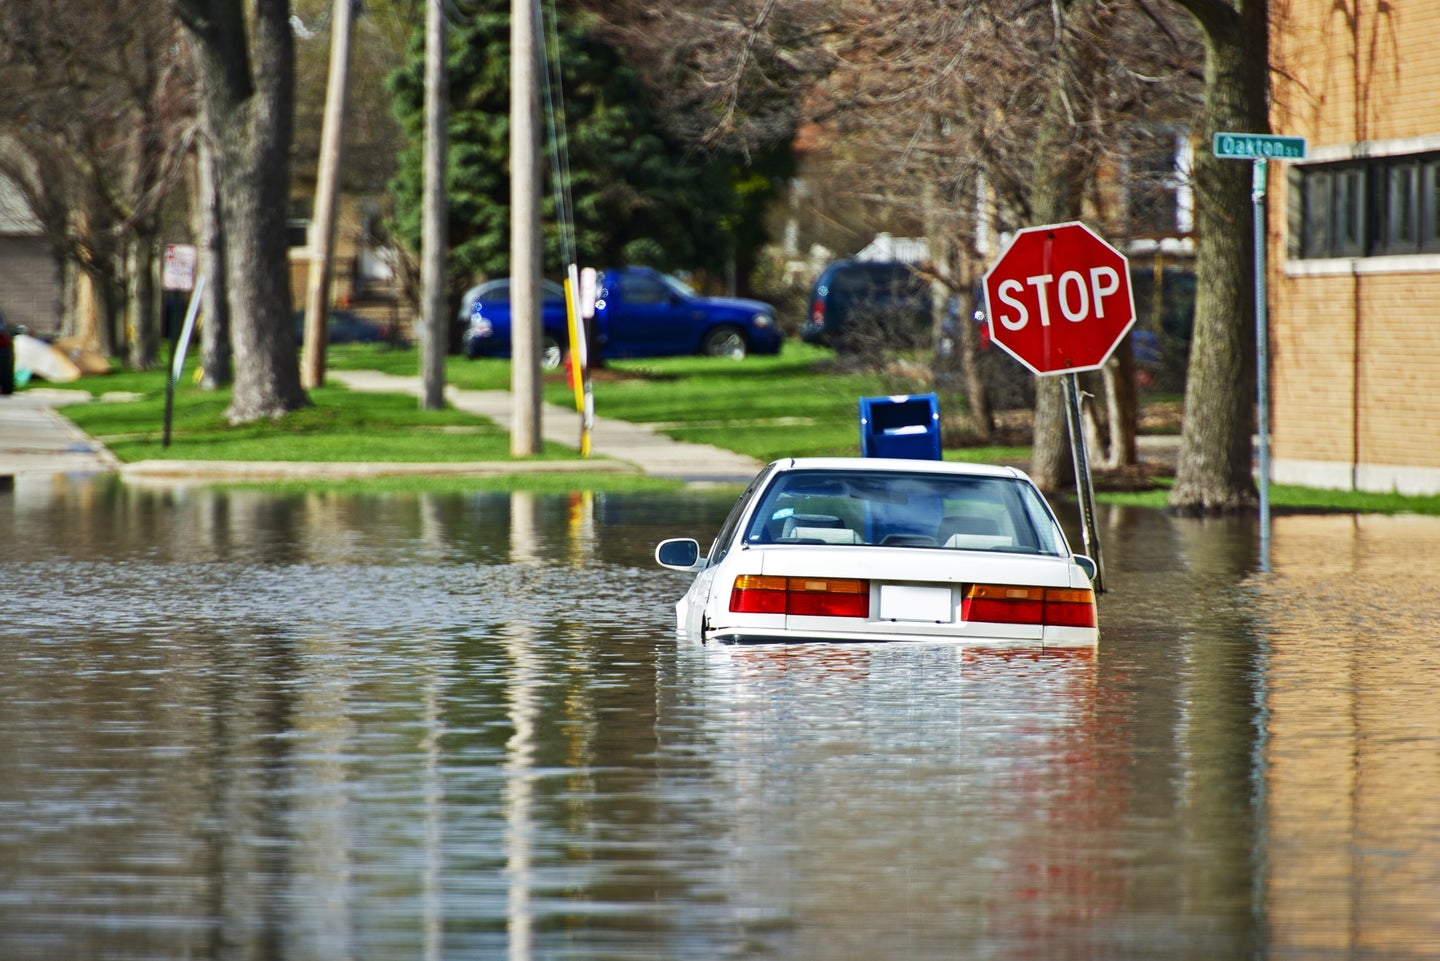 Car Under Water. Vehicle Flooded by River Flood in Des Plains, IL, USA. Flooded City Streets After Few Days of Intense Rain. Nature Disasters Photo Collection.